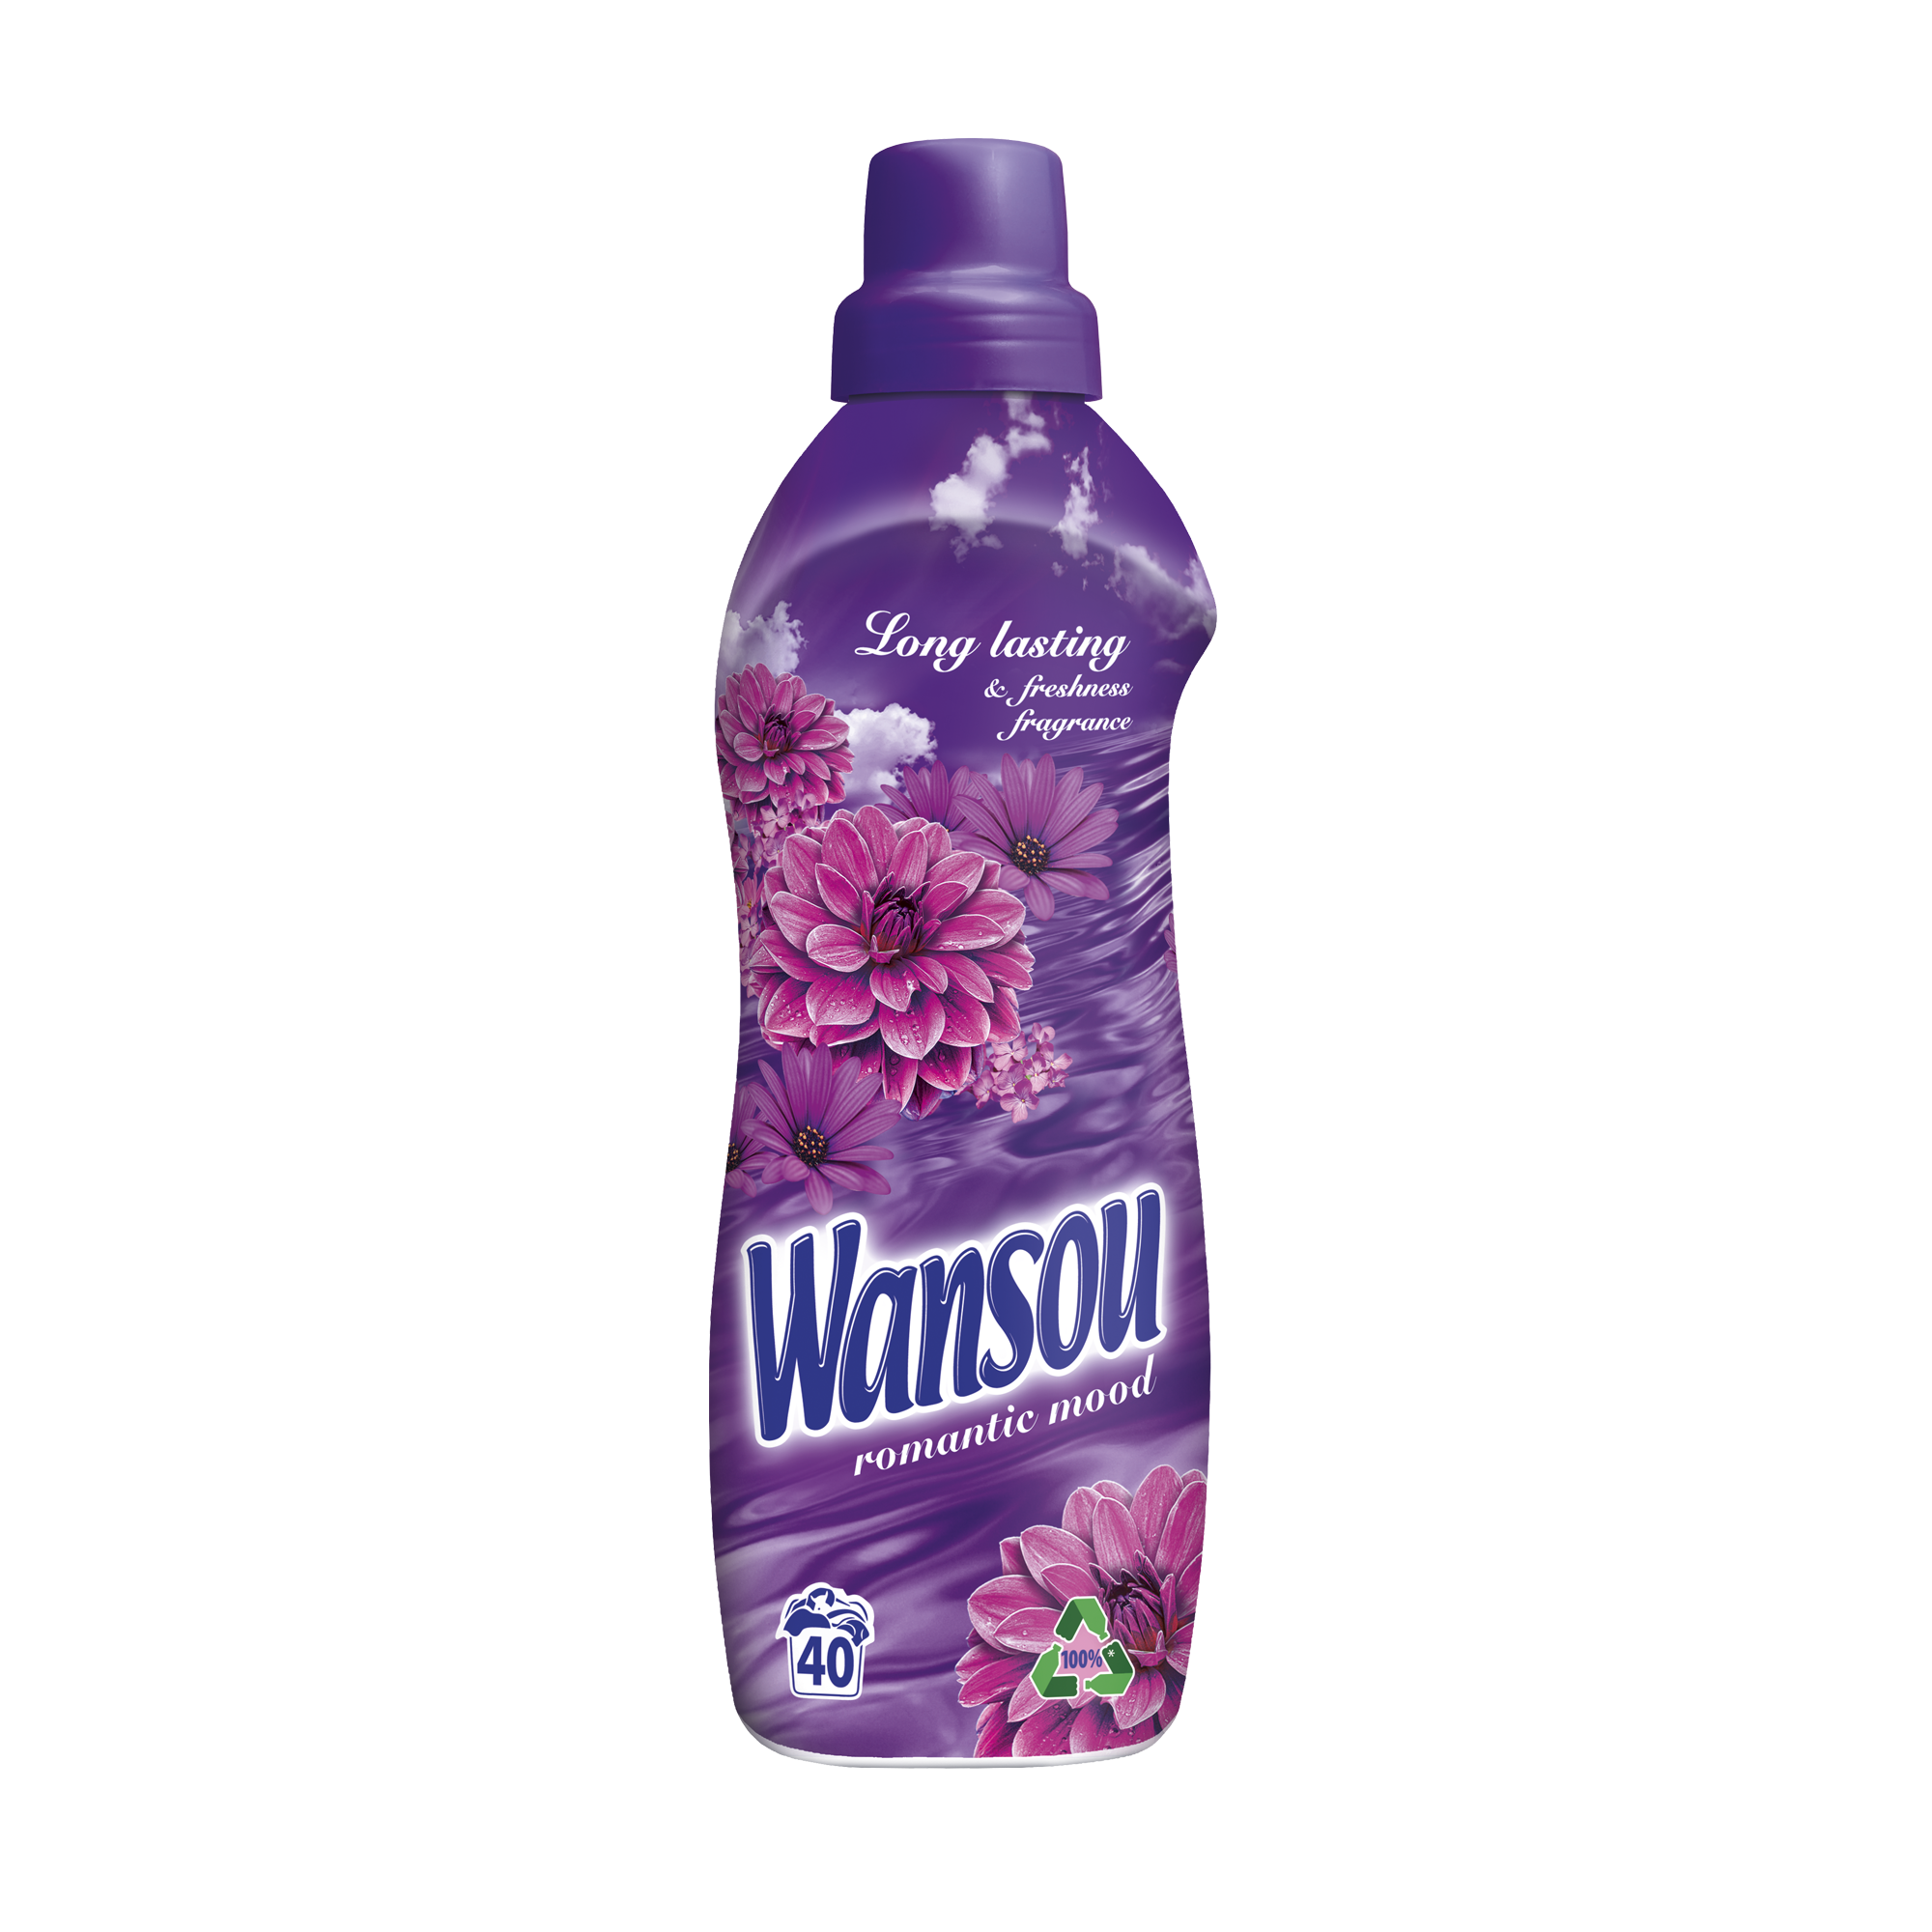 Wansou concentrated fabric softener Romantic Mood 